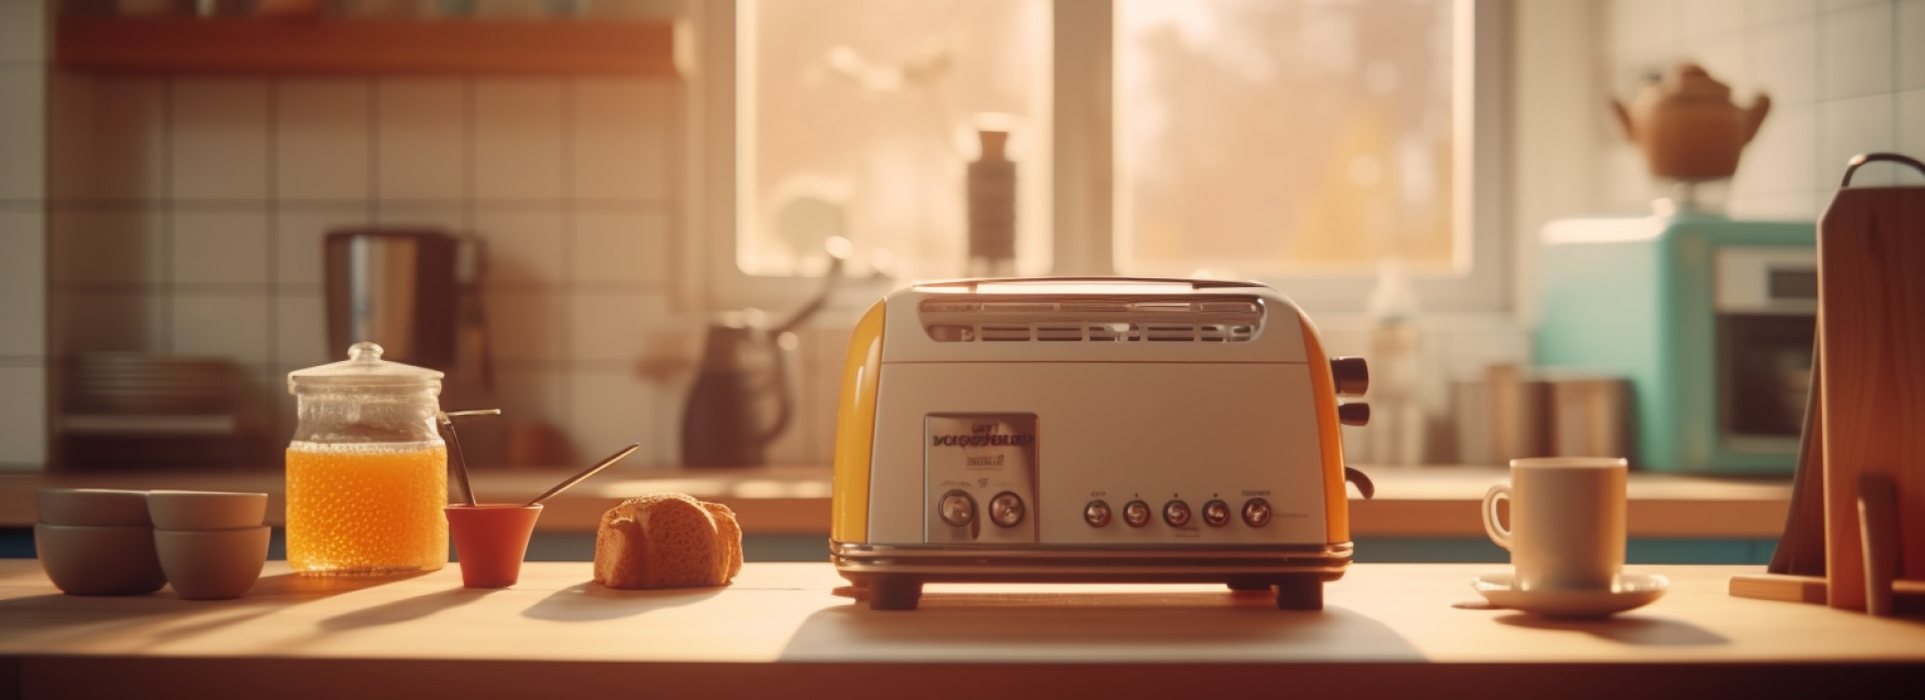 Energy Efficient Electric Toaster for an Energy-Saving Kitchen